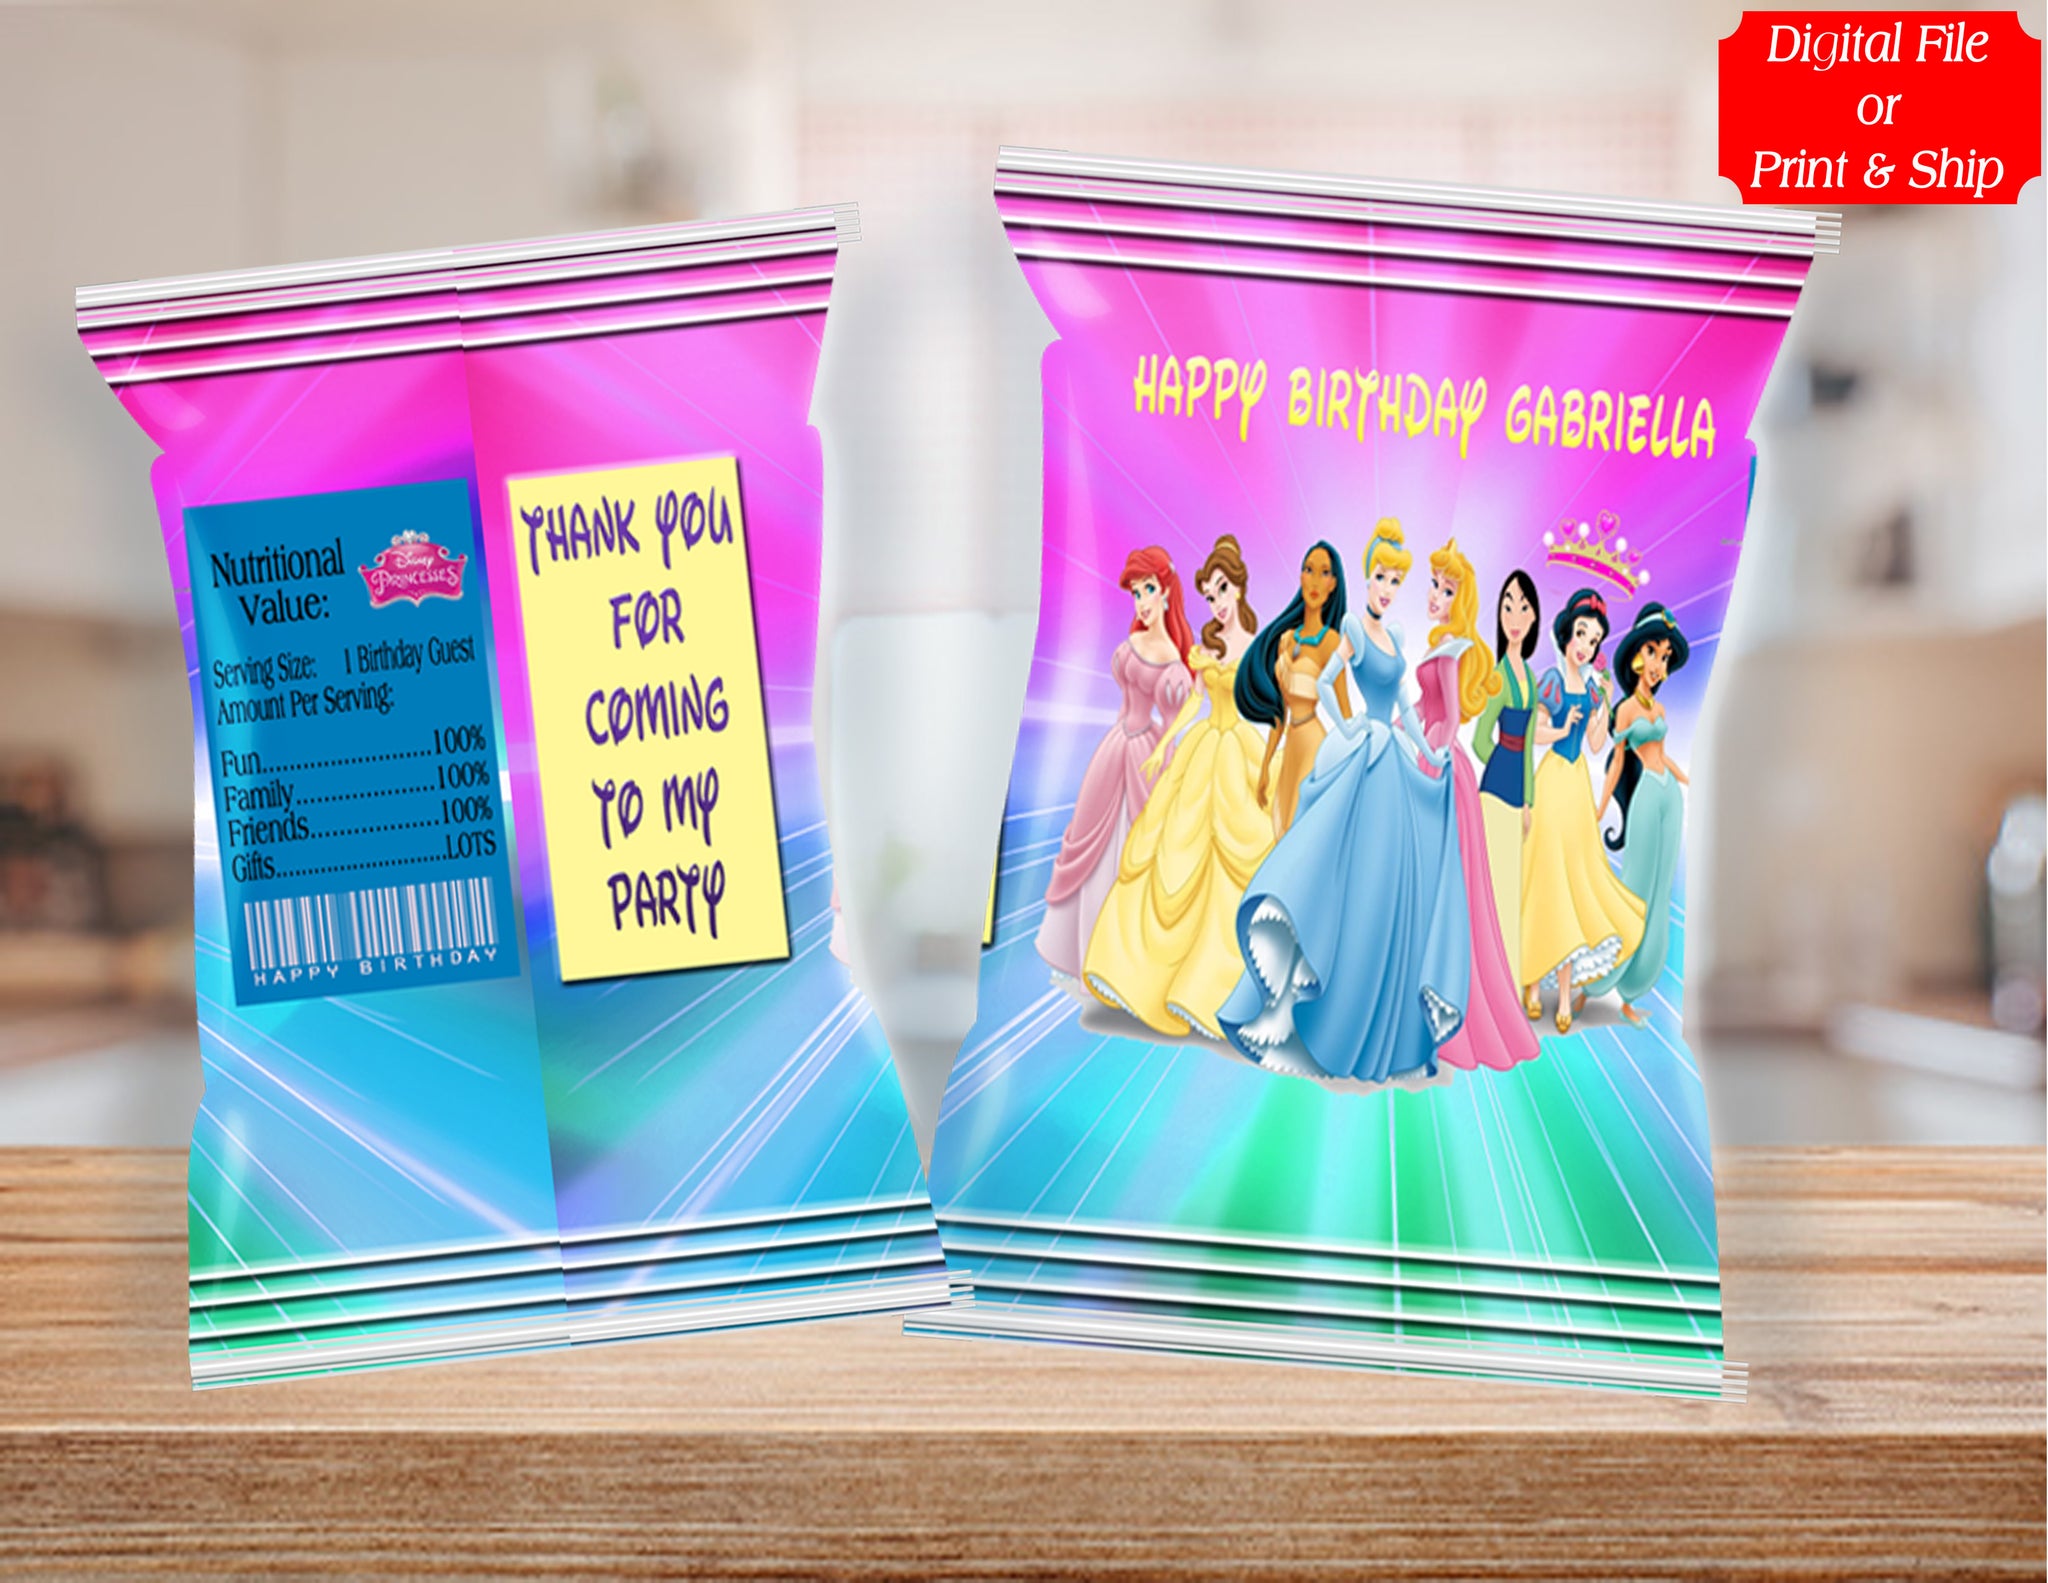 (12) Personalized DISNEY PRINCESSES Chip Candy Treat Bags Party Favors Printed or D. File